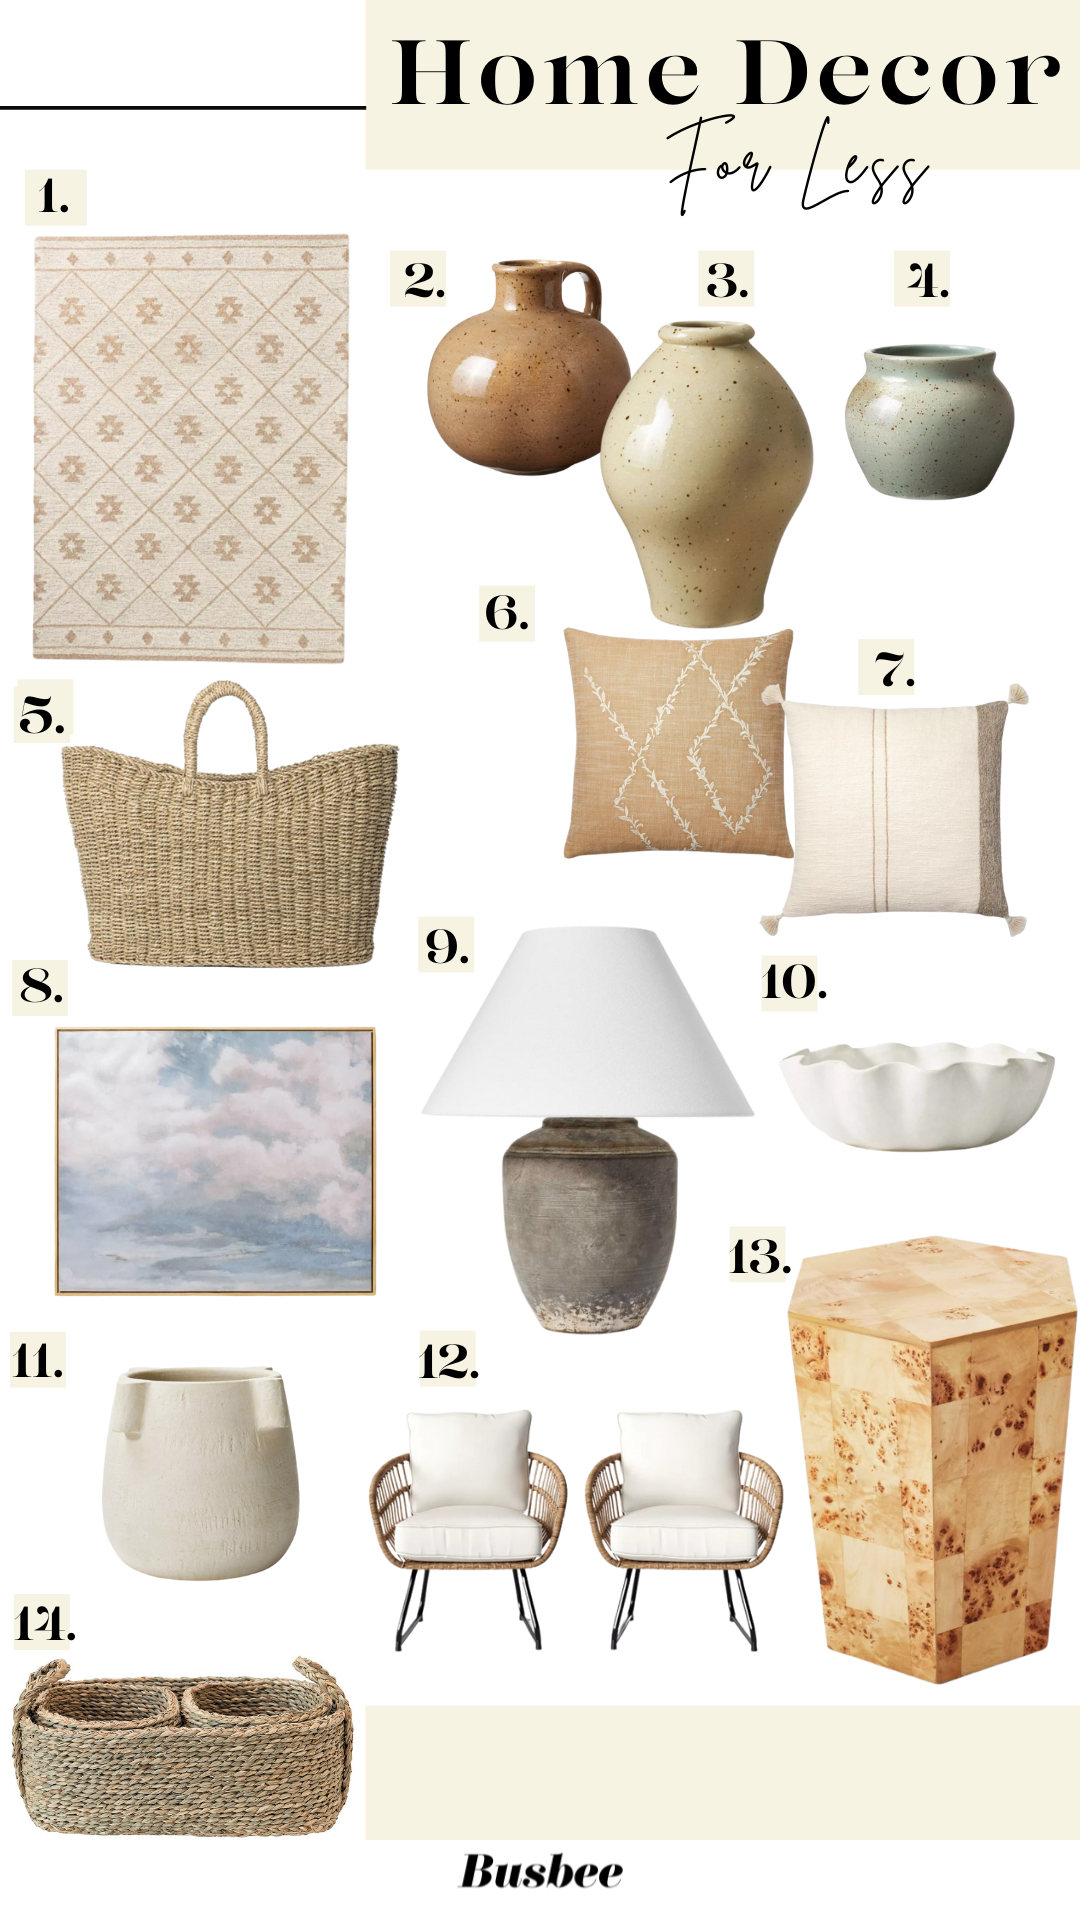 neutral home decor finds on a budget, home decor that looks expensive, updated home decor, modern home decor, affordable home decor, Studio McGee home decor, Target home, Amazon home